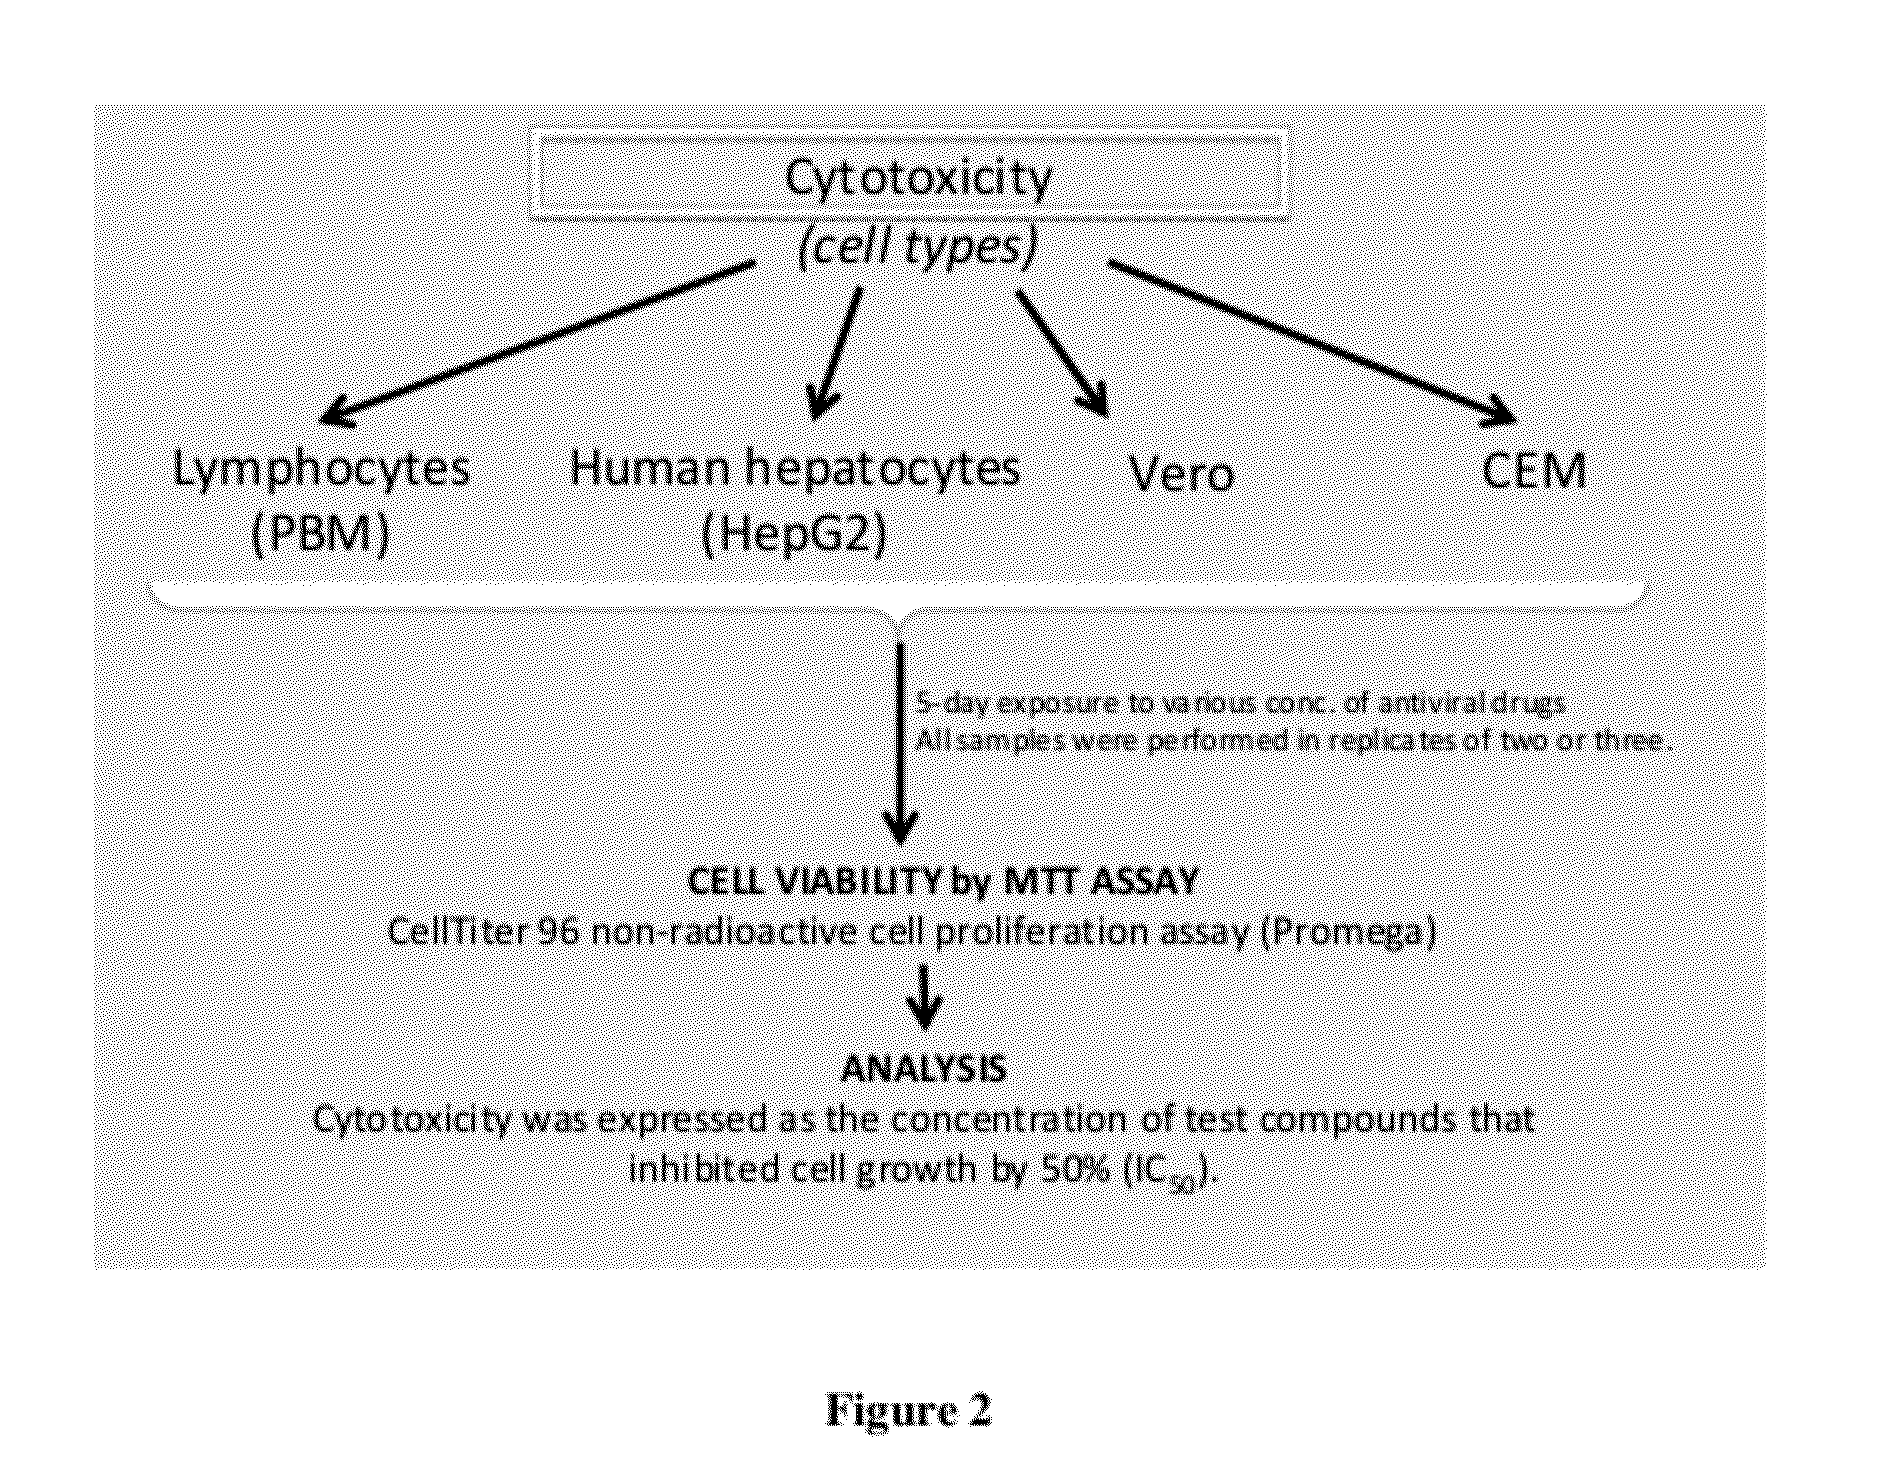 Monophosphate prodrugs of dapd and analogs thereof